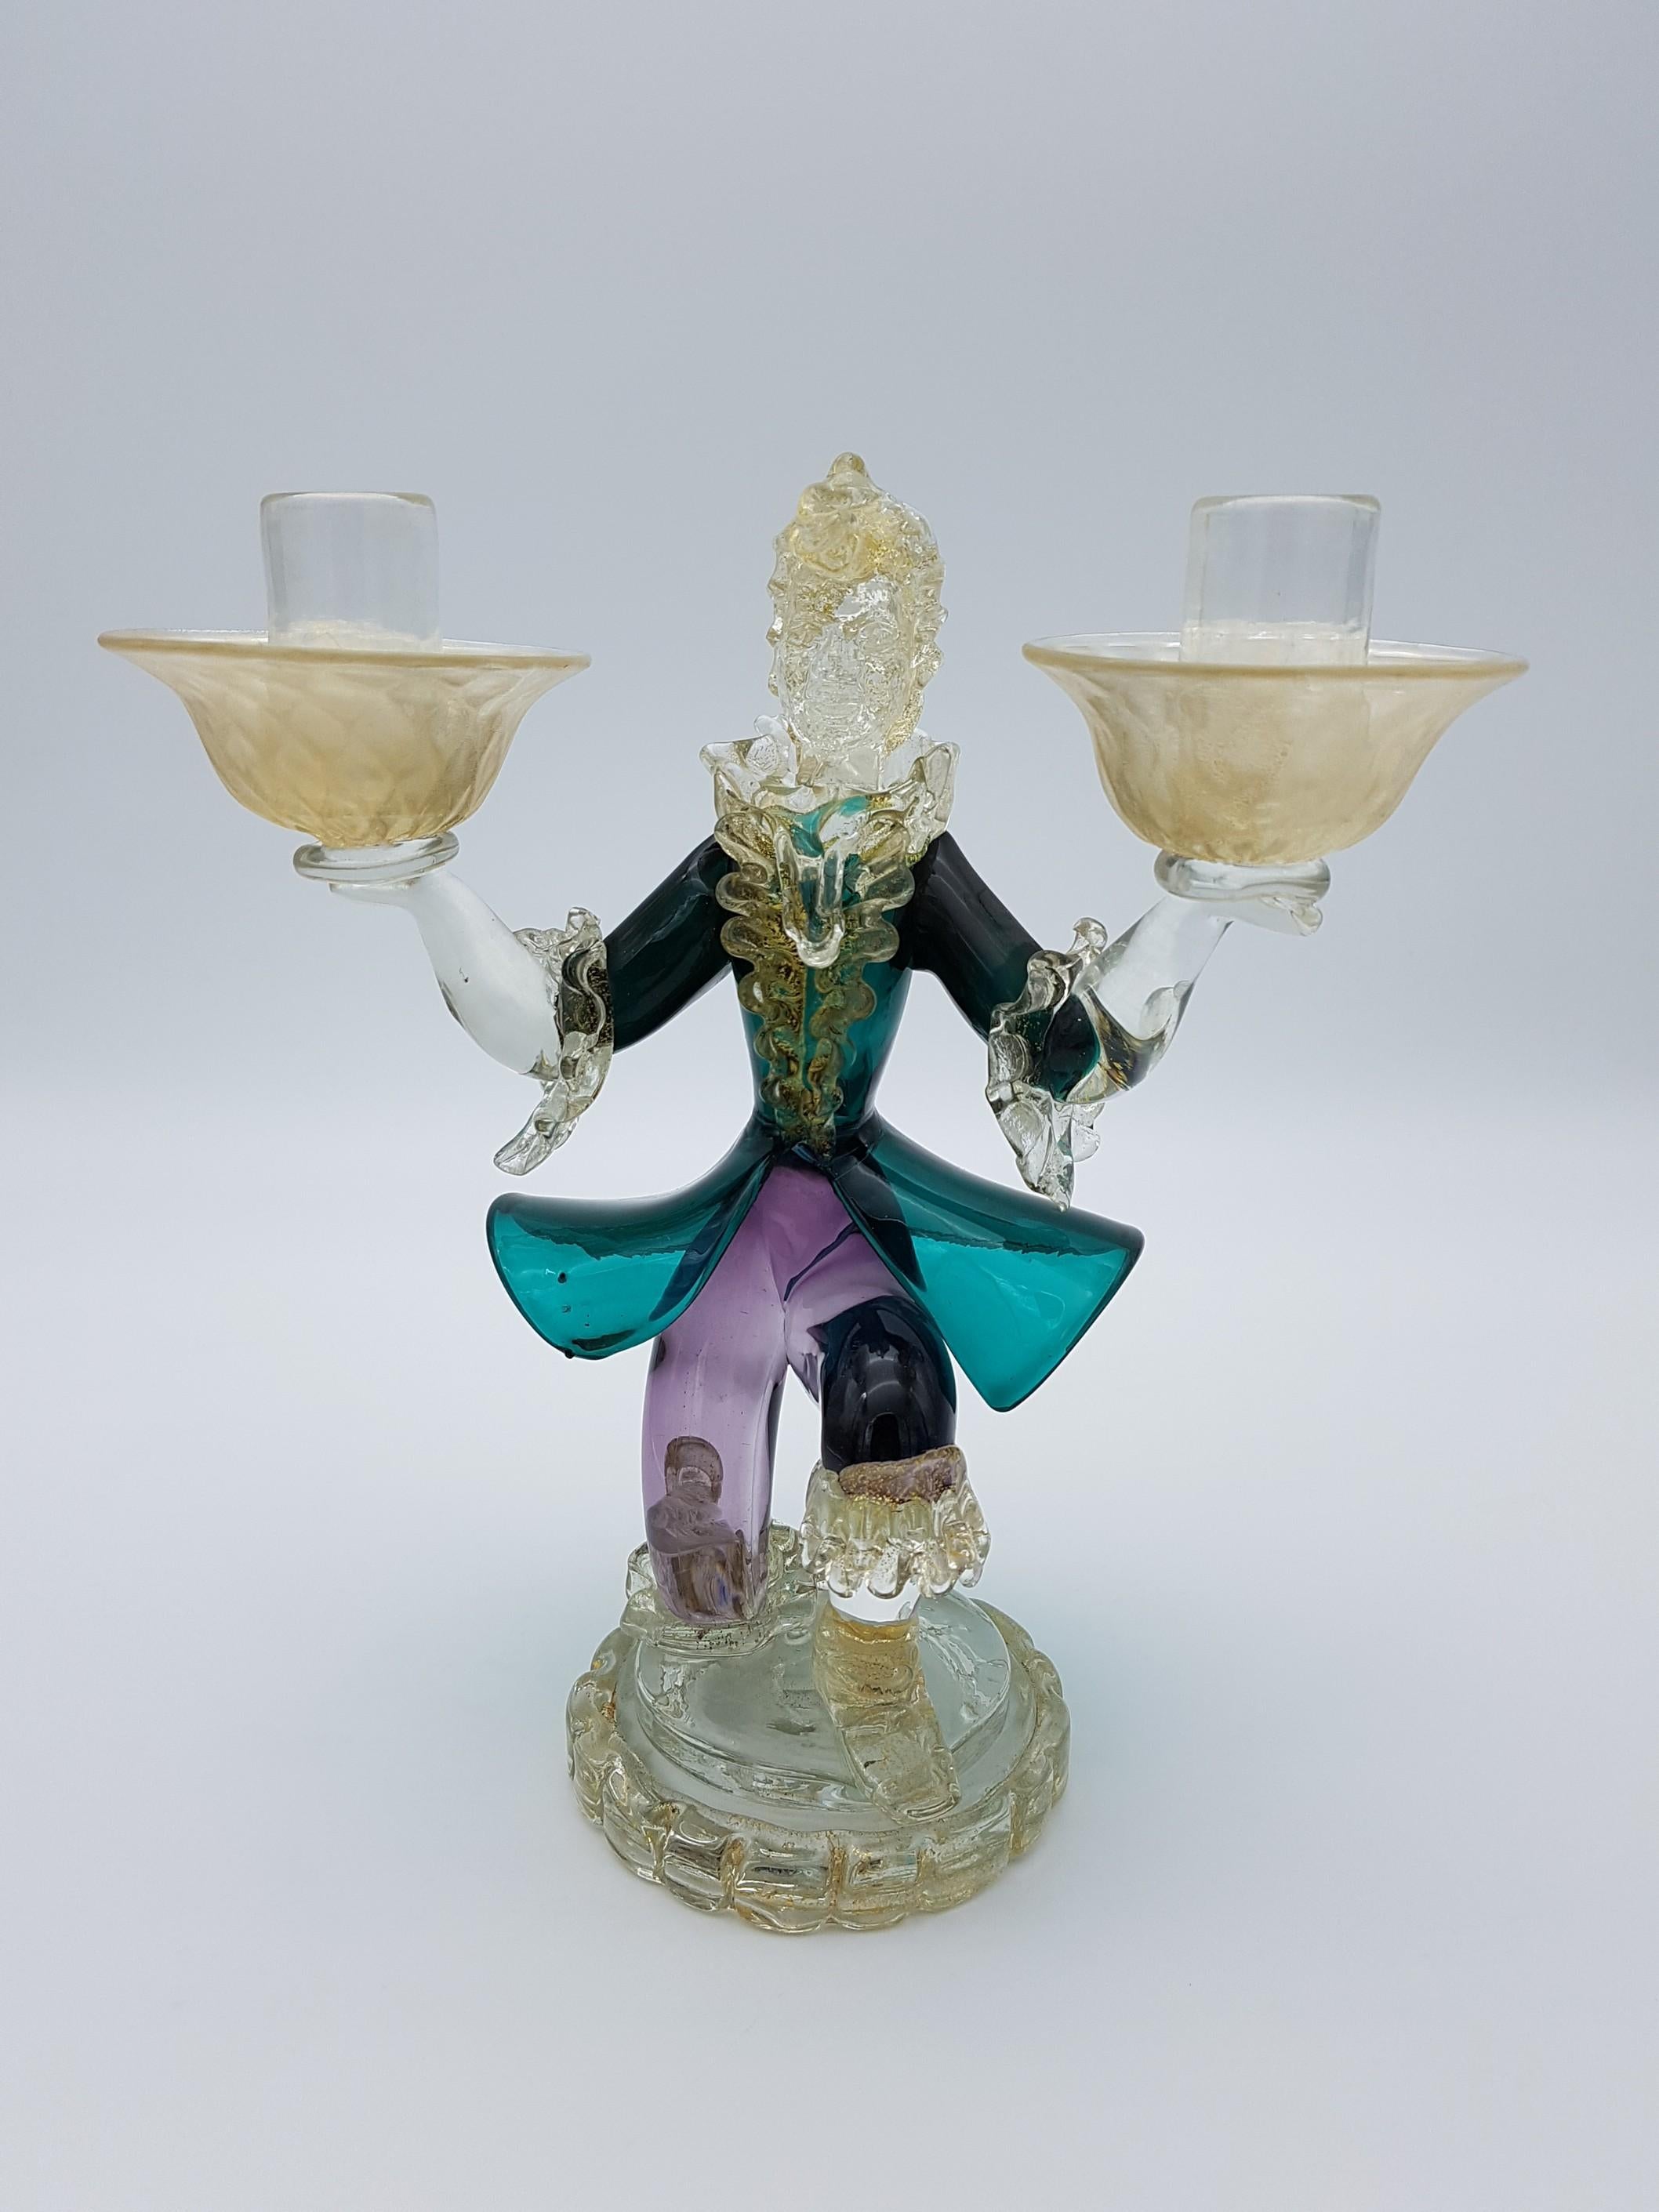 Italian Vintage Murano Glass Costumed Figurine/Candleholder, Green & Purple, by Cenedese For Sale